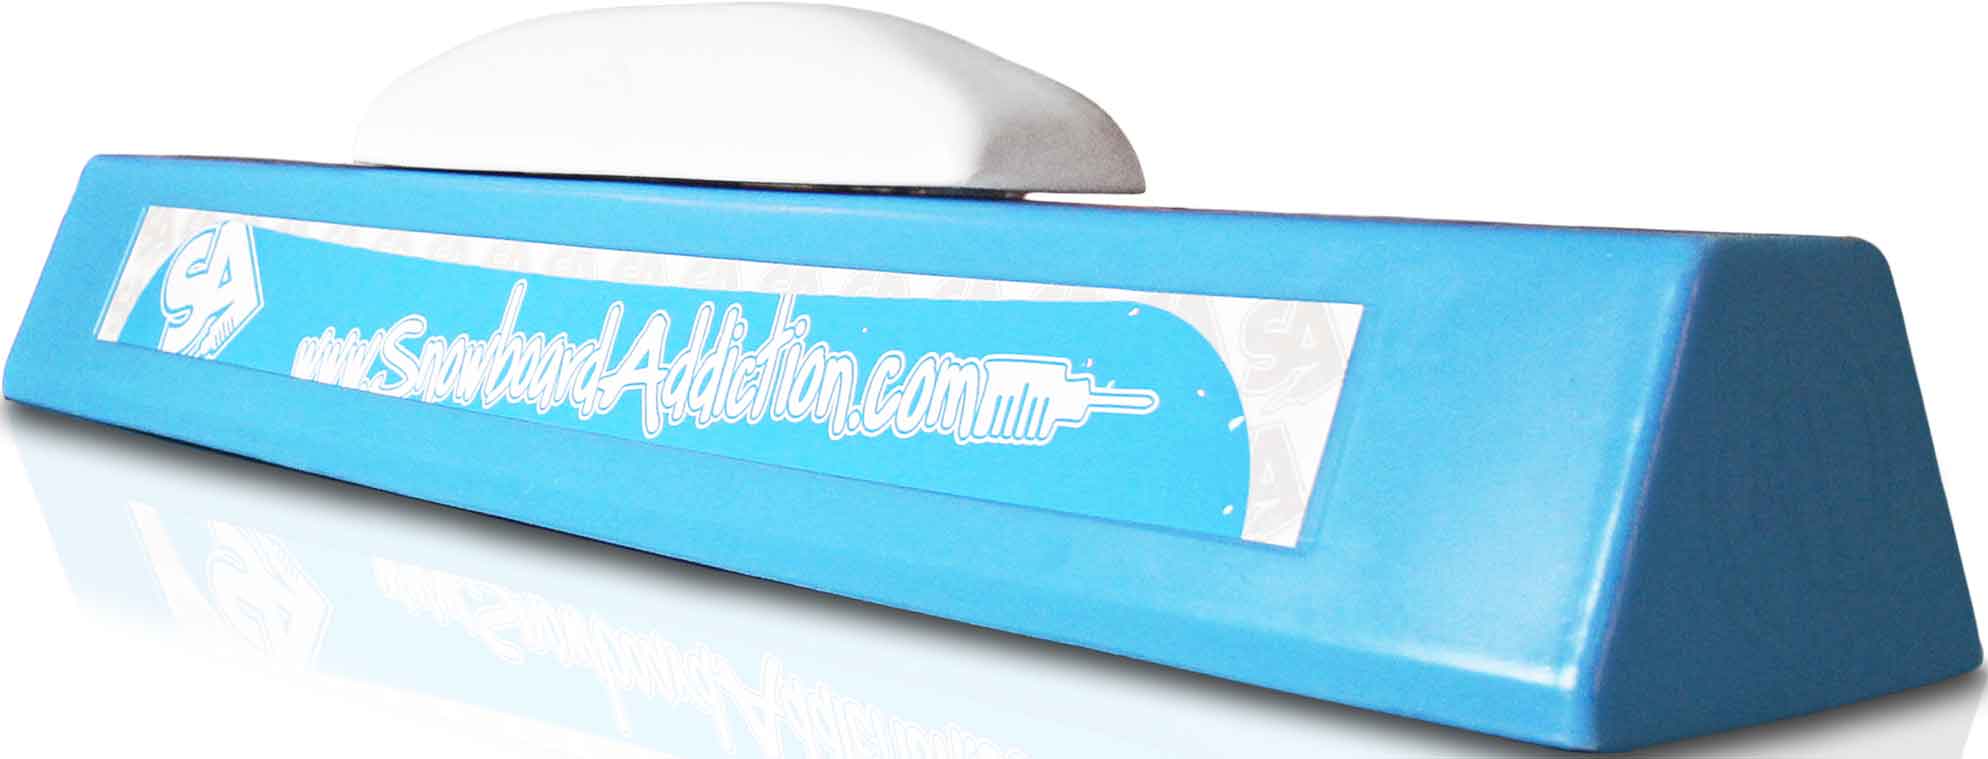 Geweldig Voorgevoel Noord Snowboard Addiction Balance Bar Review And Buying Advice - The Good Ride